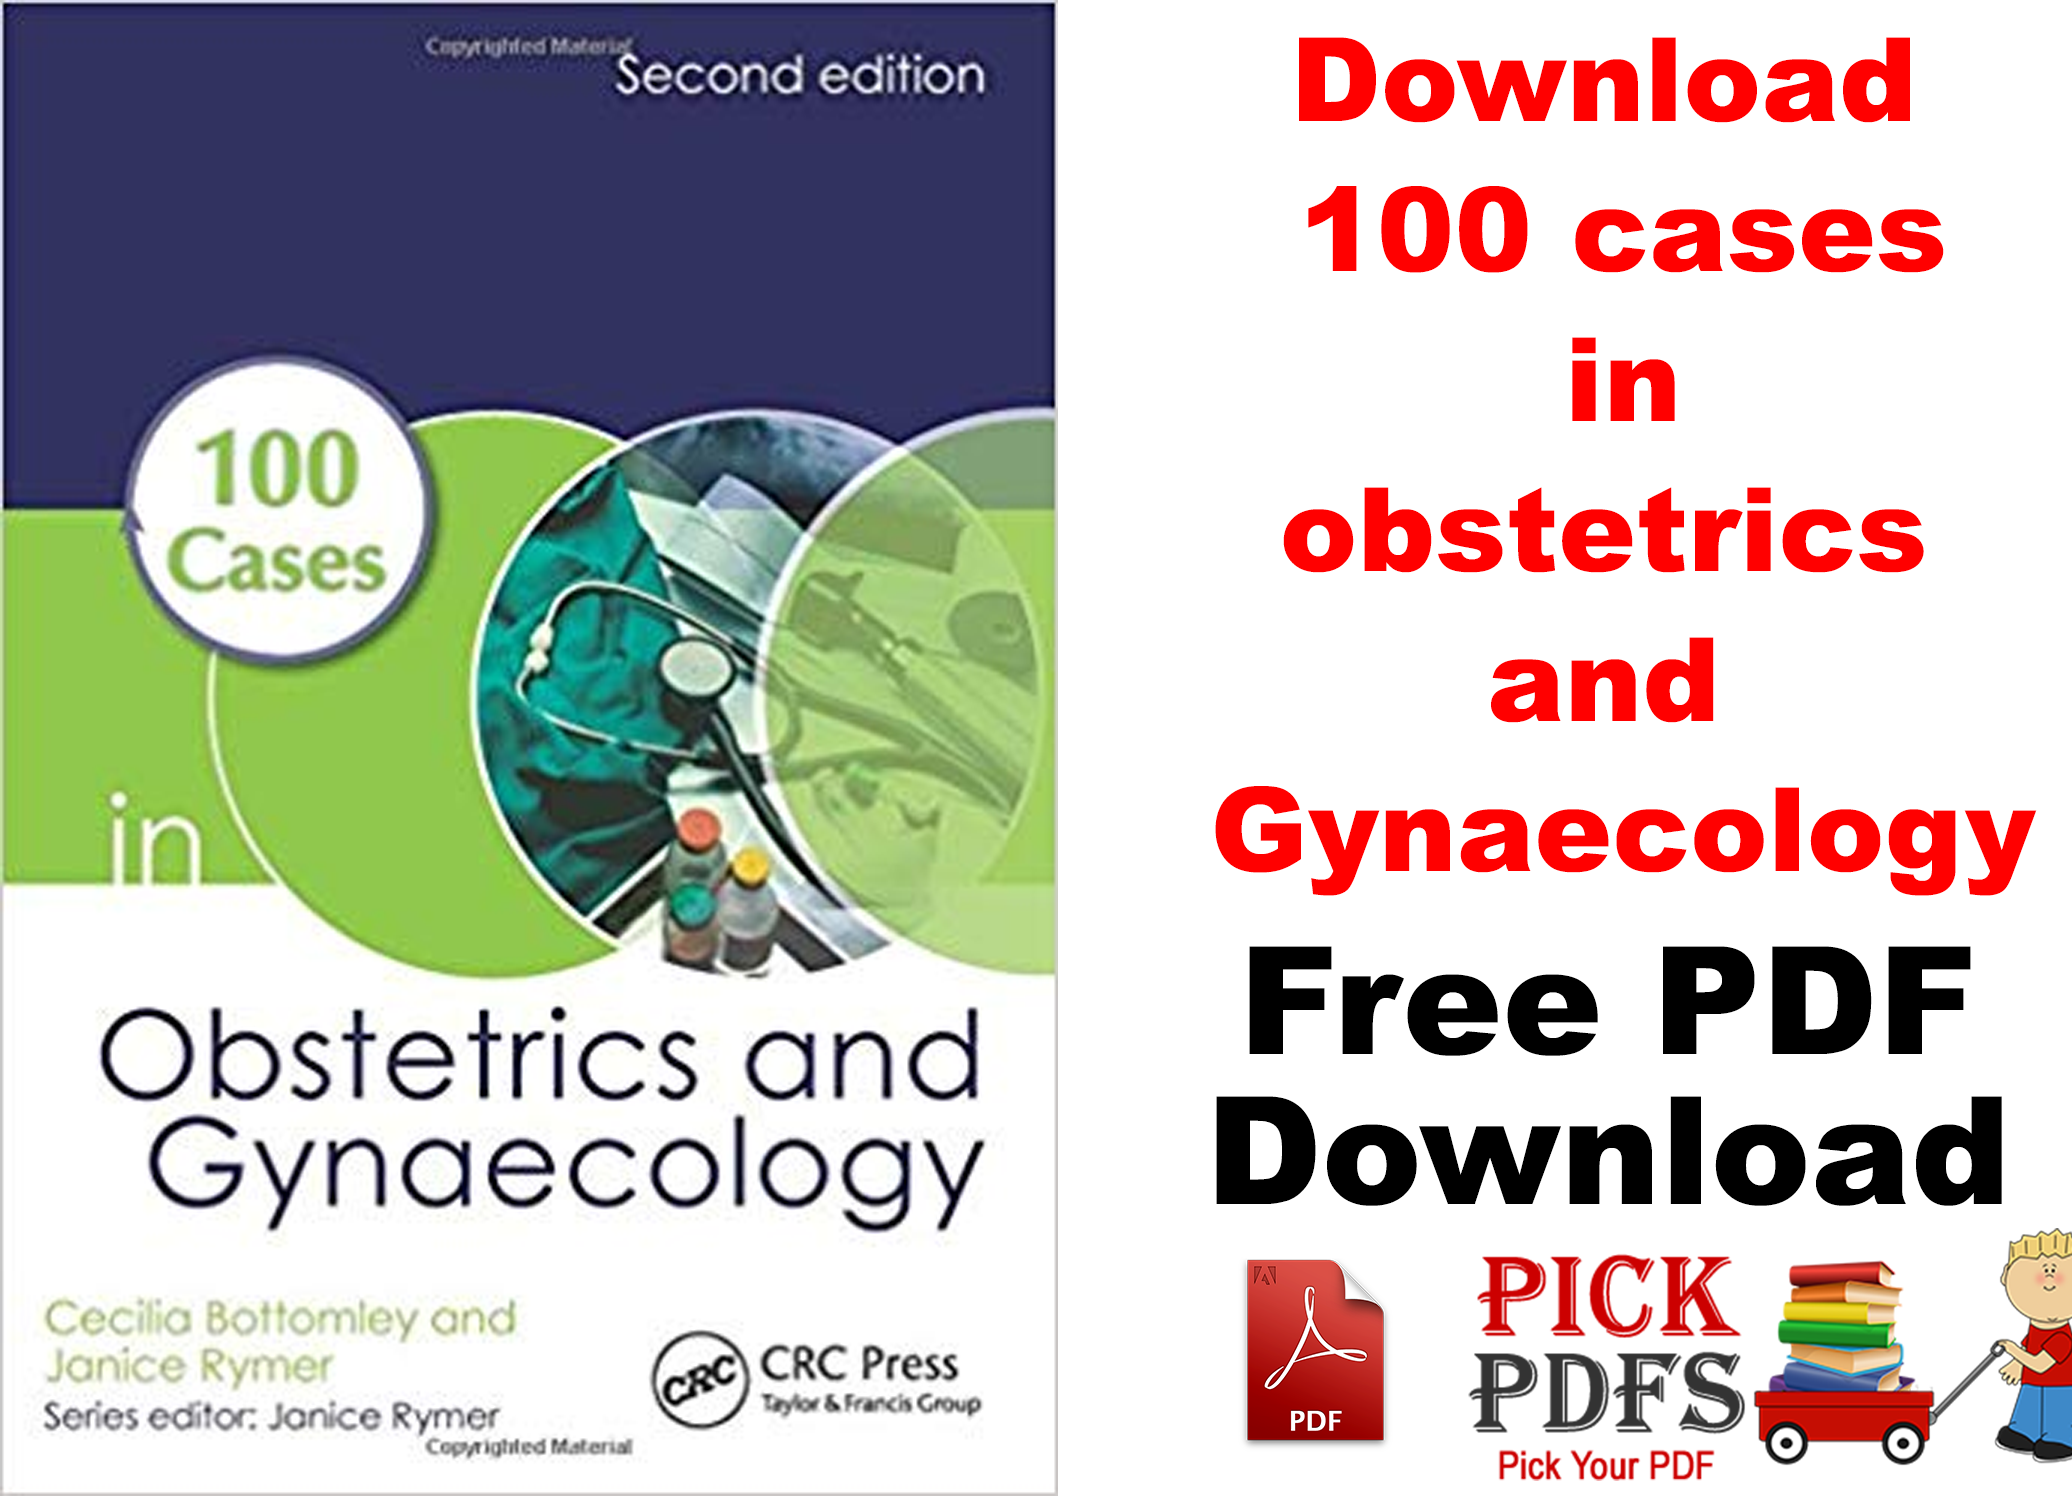 https://pickpdfs.com/download-step-up-to-obstetrics-and-gynecology-pdf-free2021/